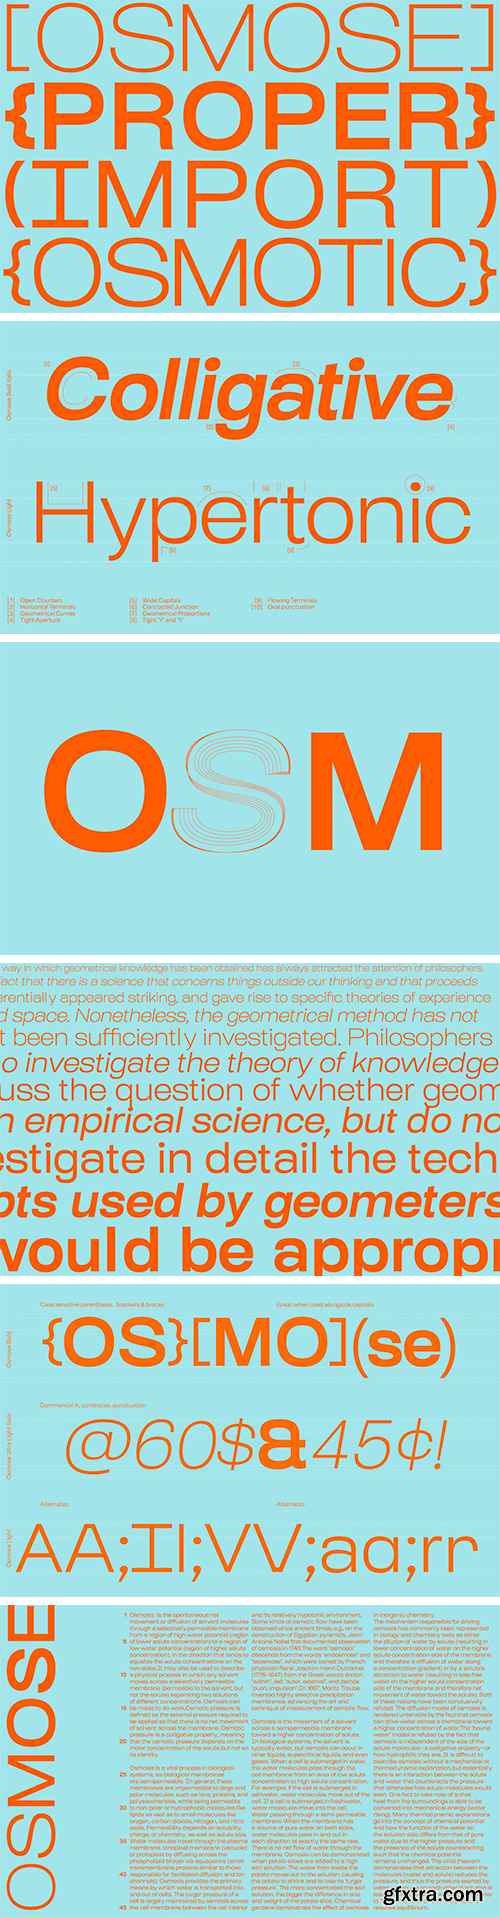 Osmose Variable Font